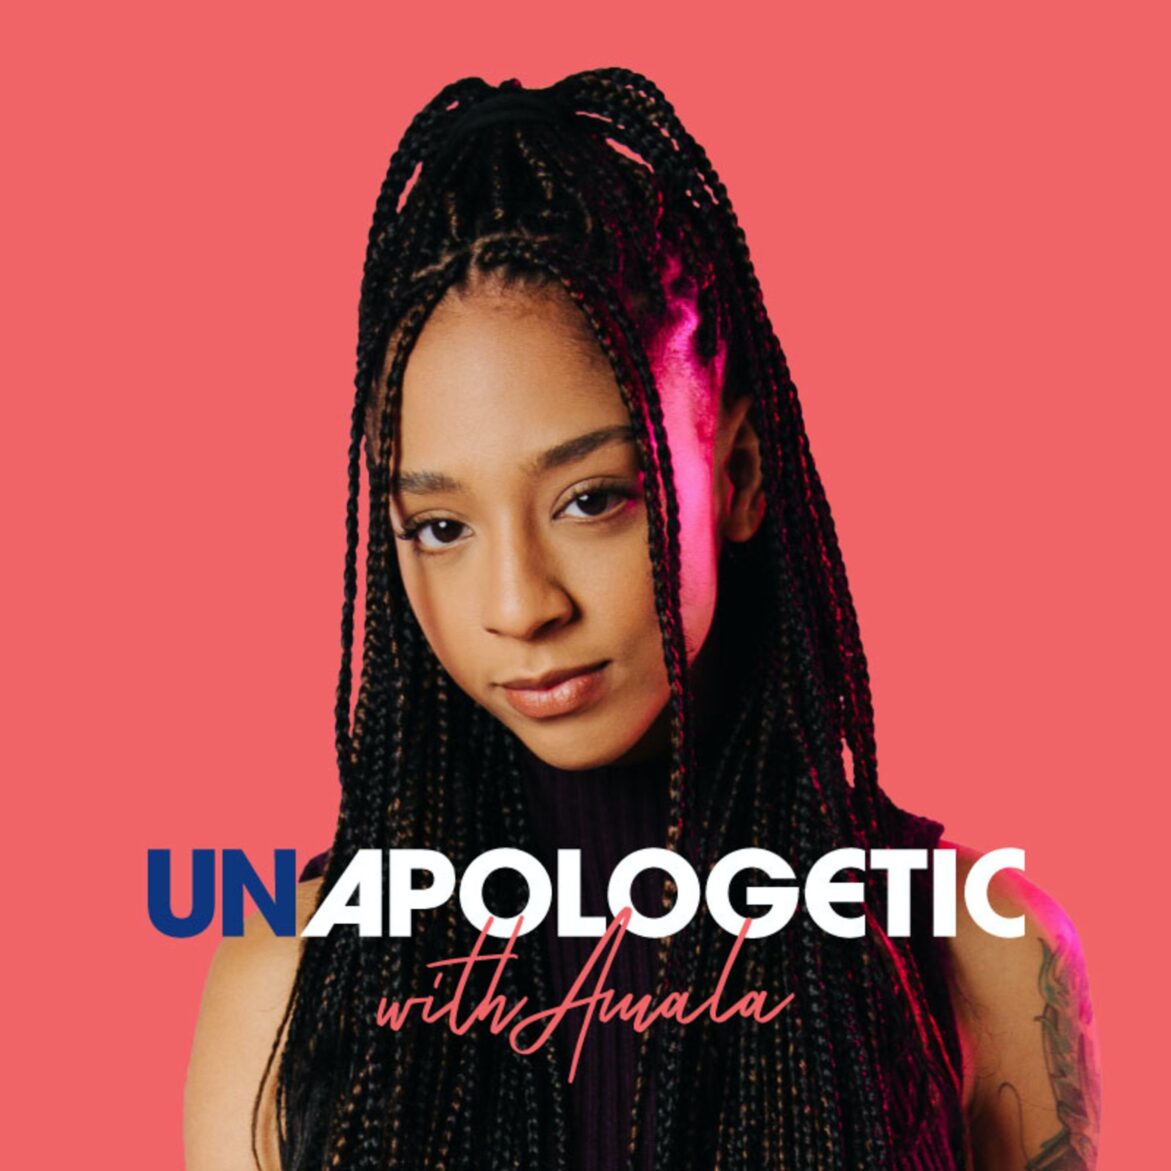 Black Podcasting - Has Google Created A Sentient AI? - Unapologetic LIVE 06/16/22